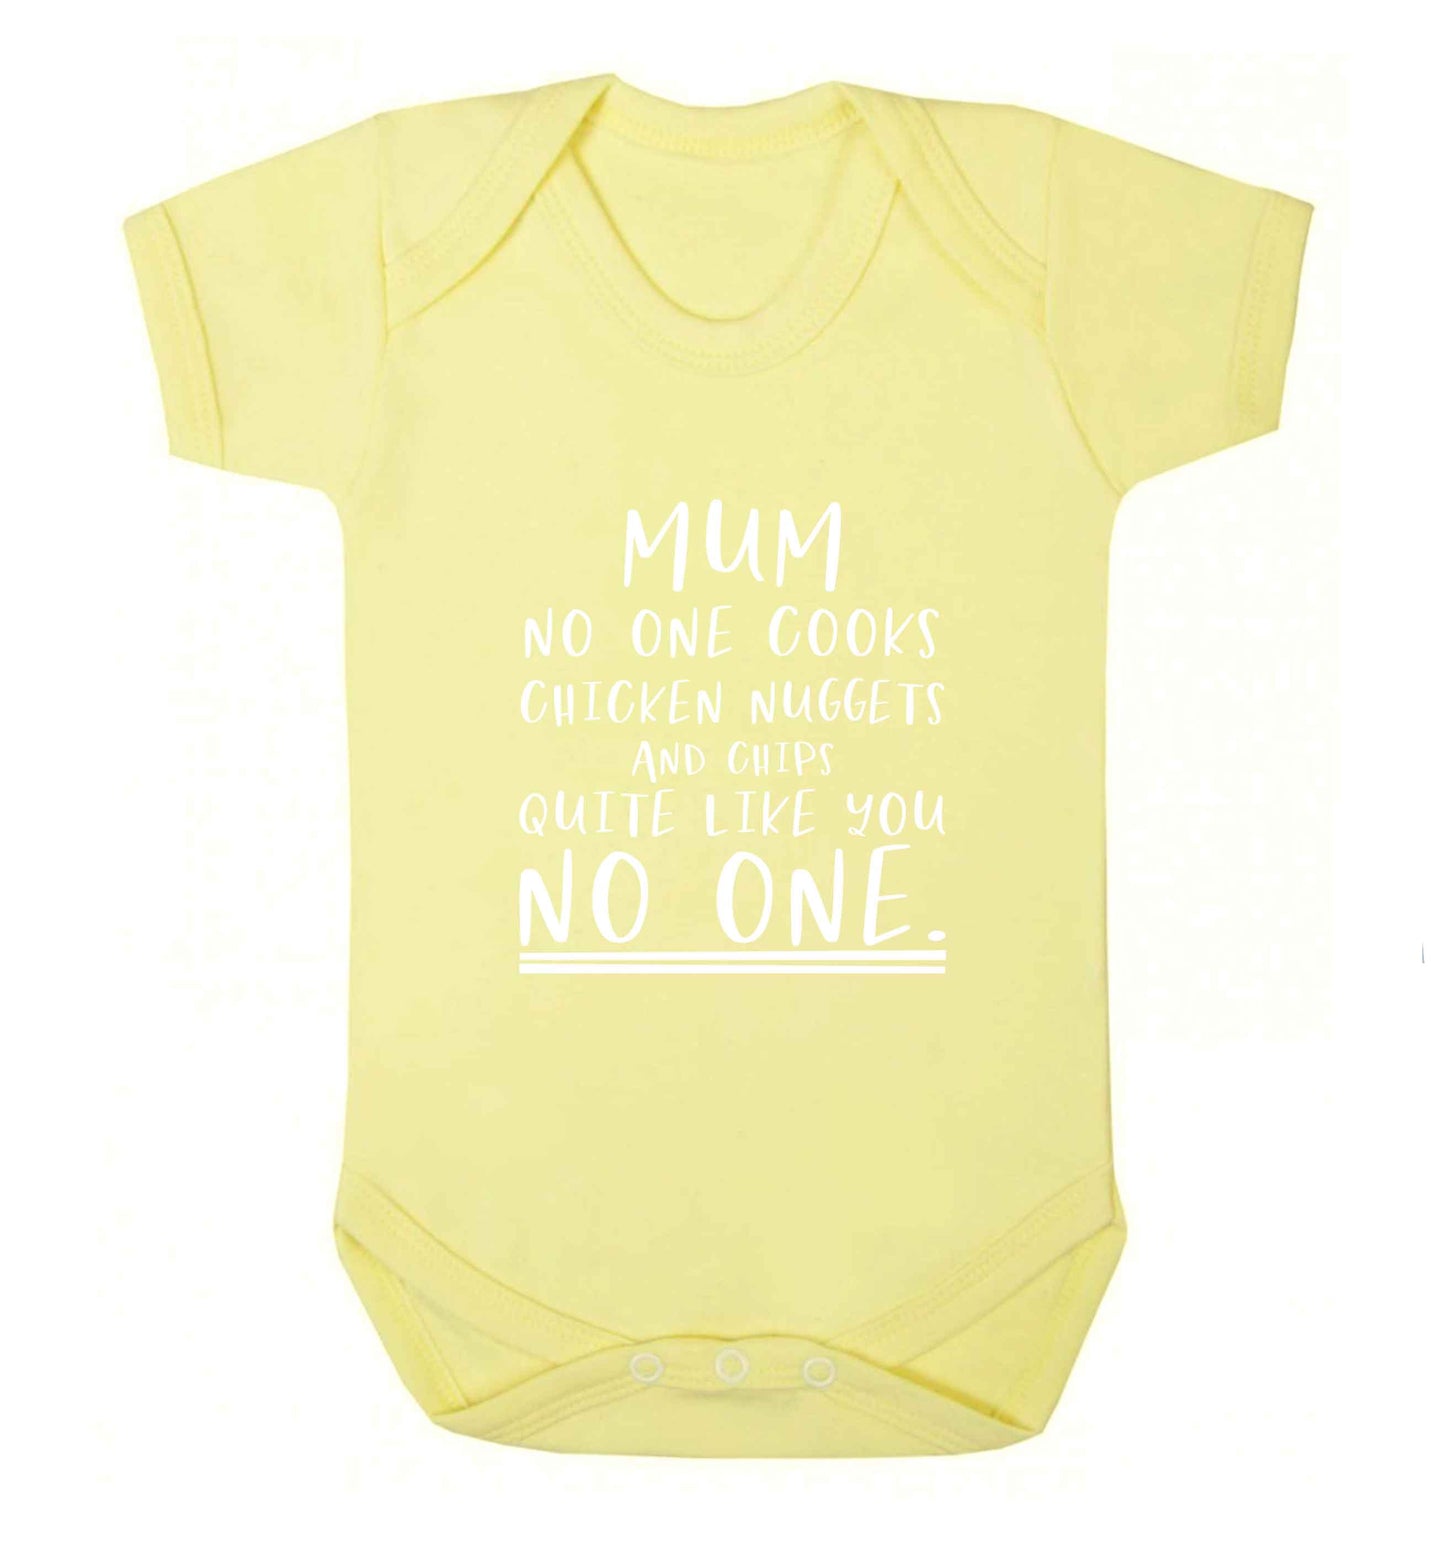 Super funny sassy gift for mother's day or birthday!  Mum no one cooks chicken nuggets and chips like you no one baby vest pale yellow 18-24 months